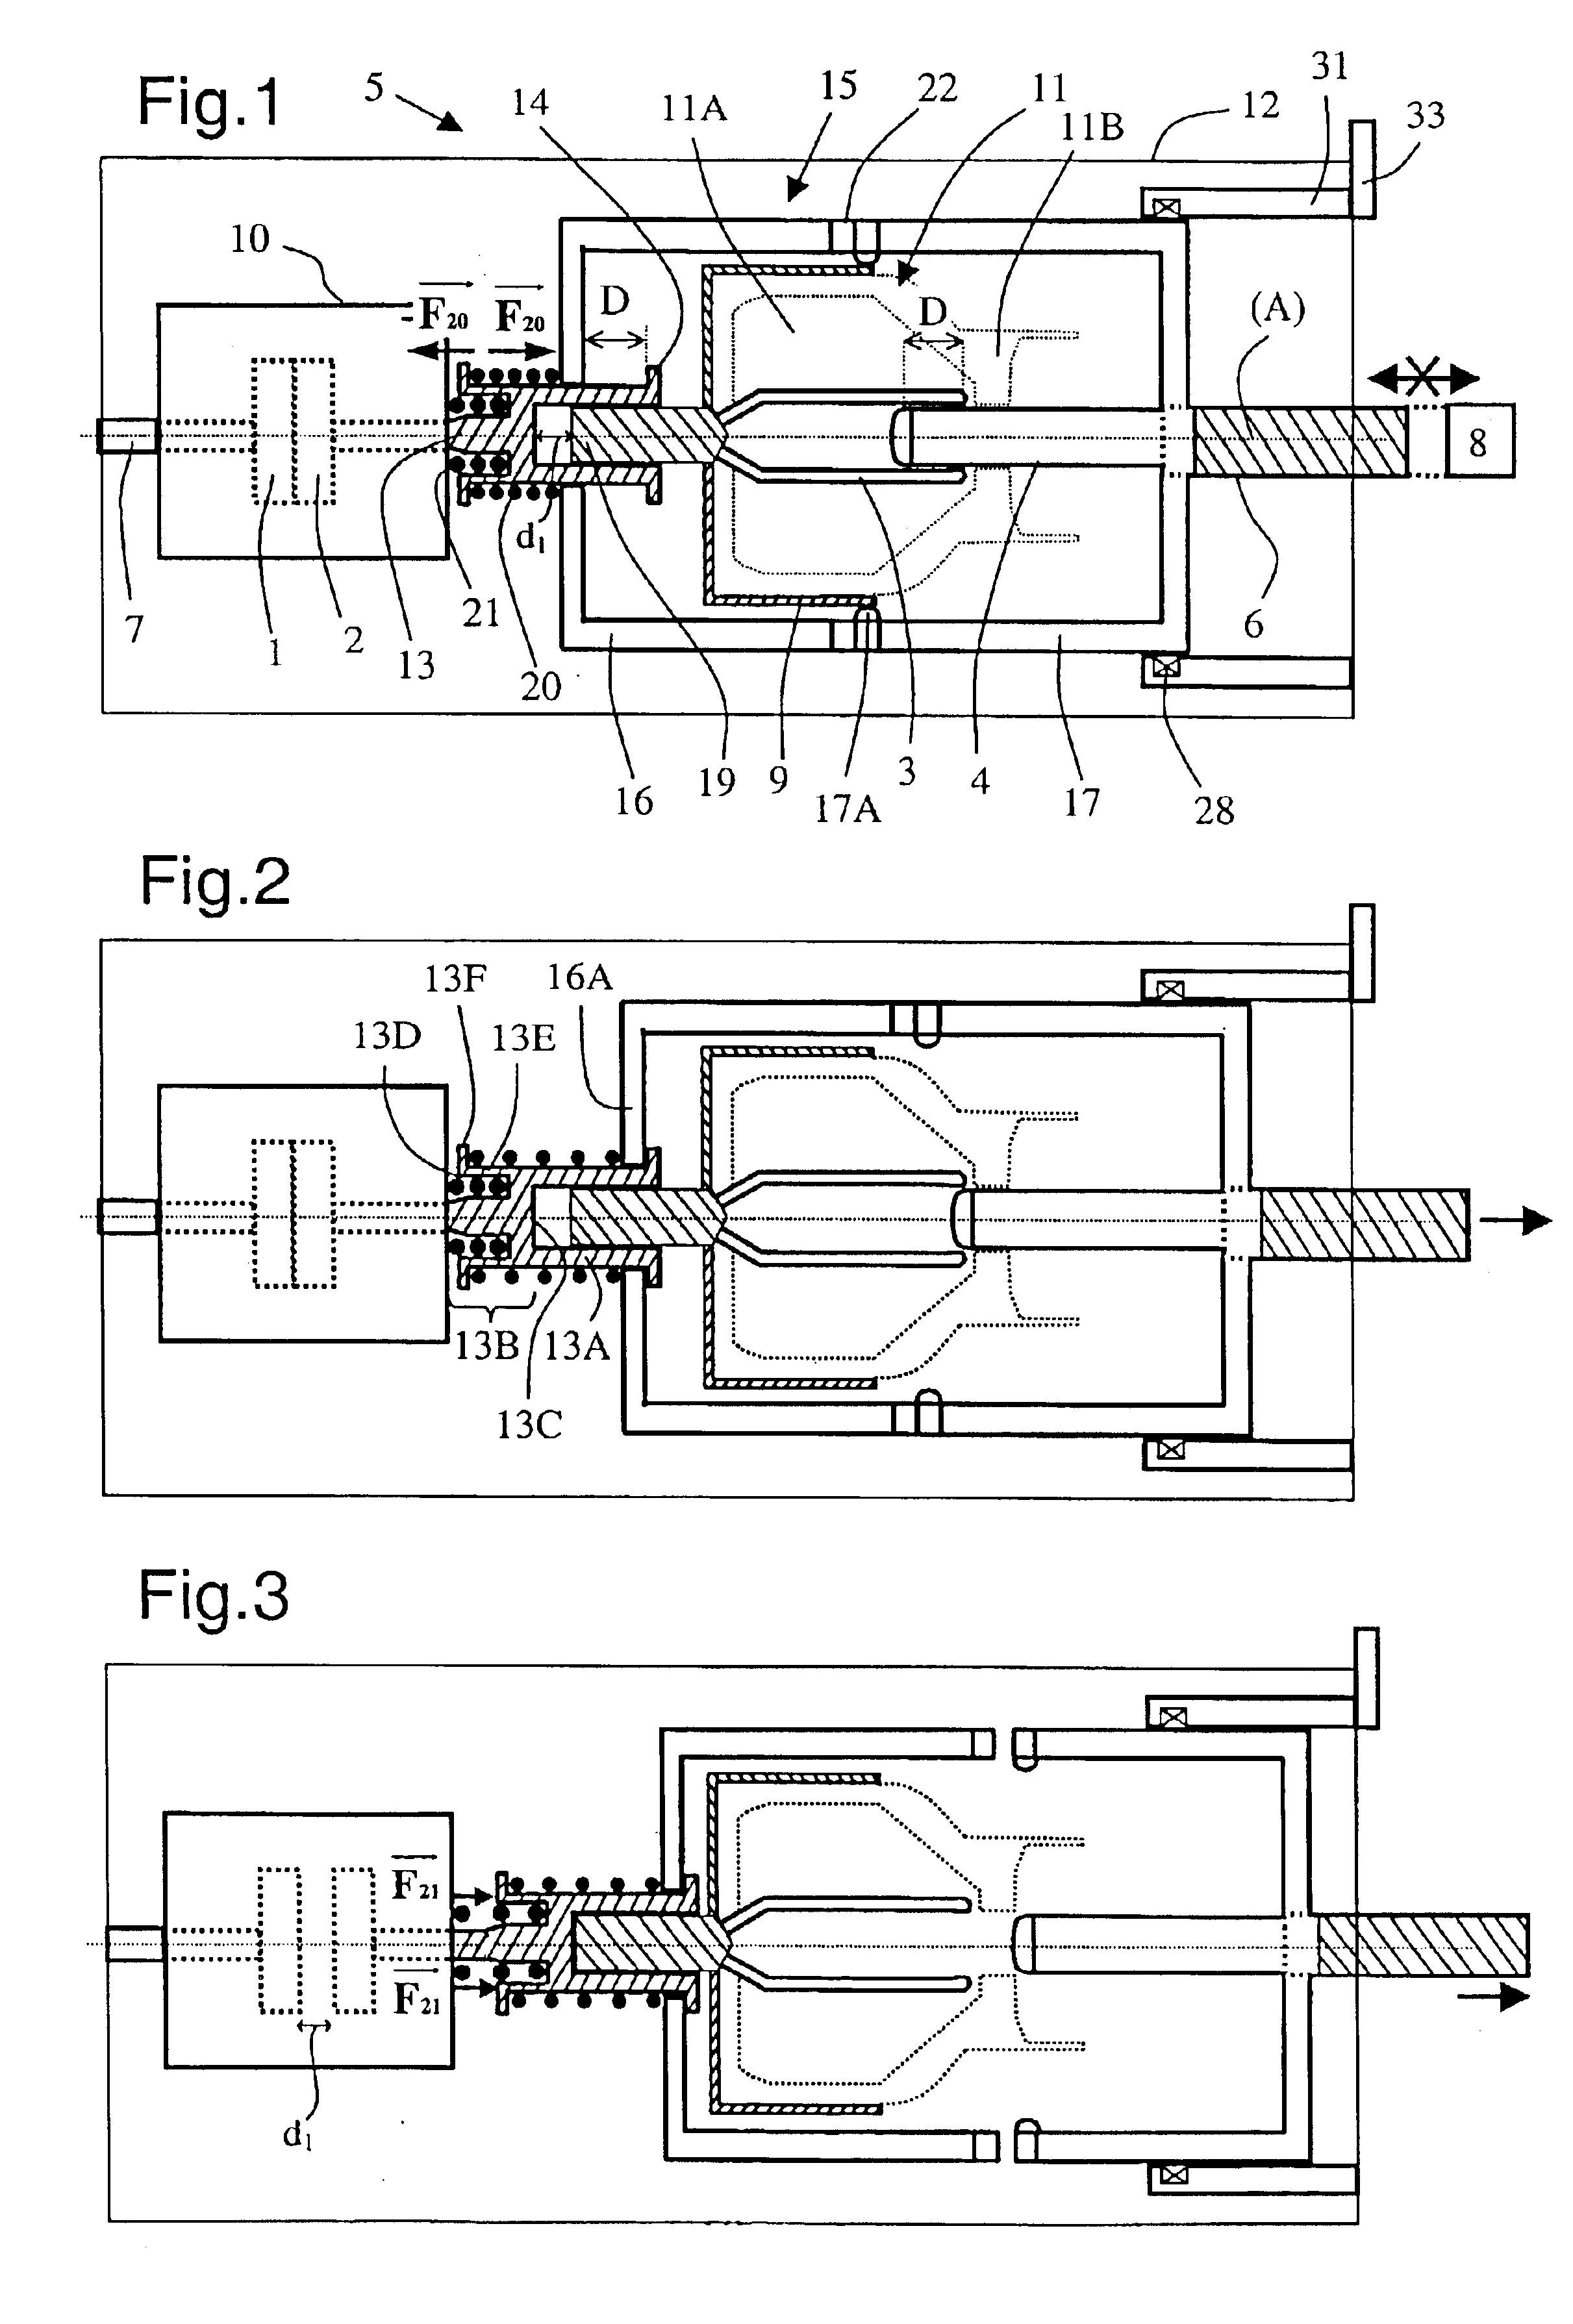 High-voltage or medium-voltage switch device with combined vacuum and gas breaking